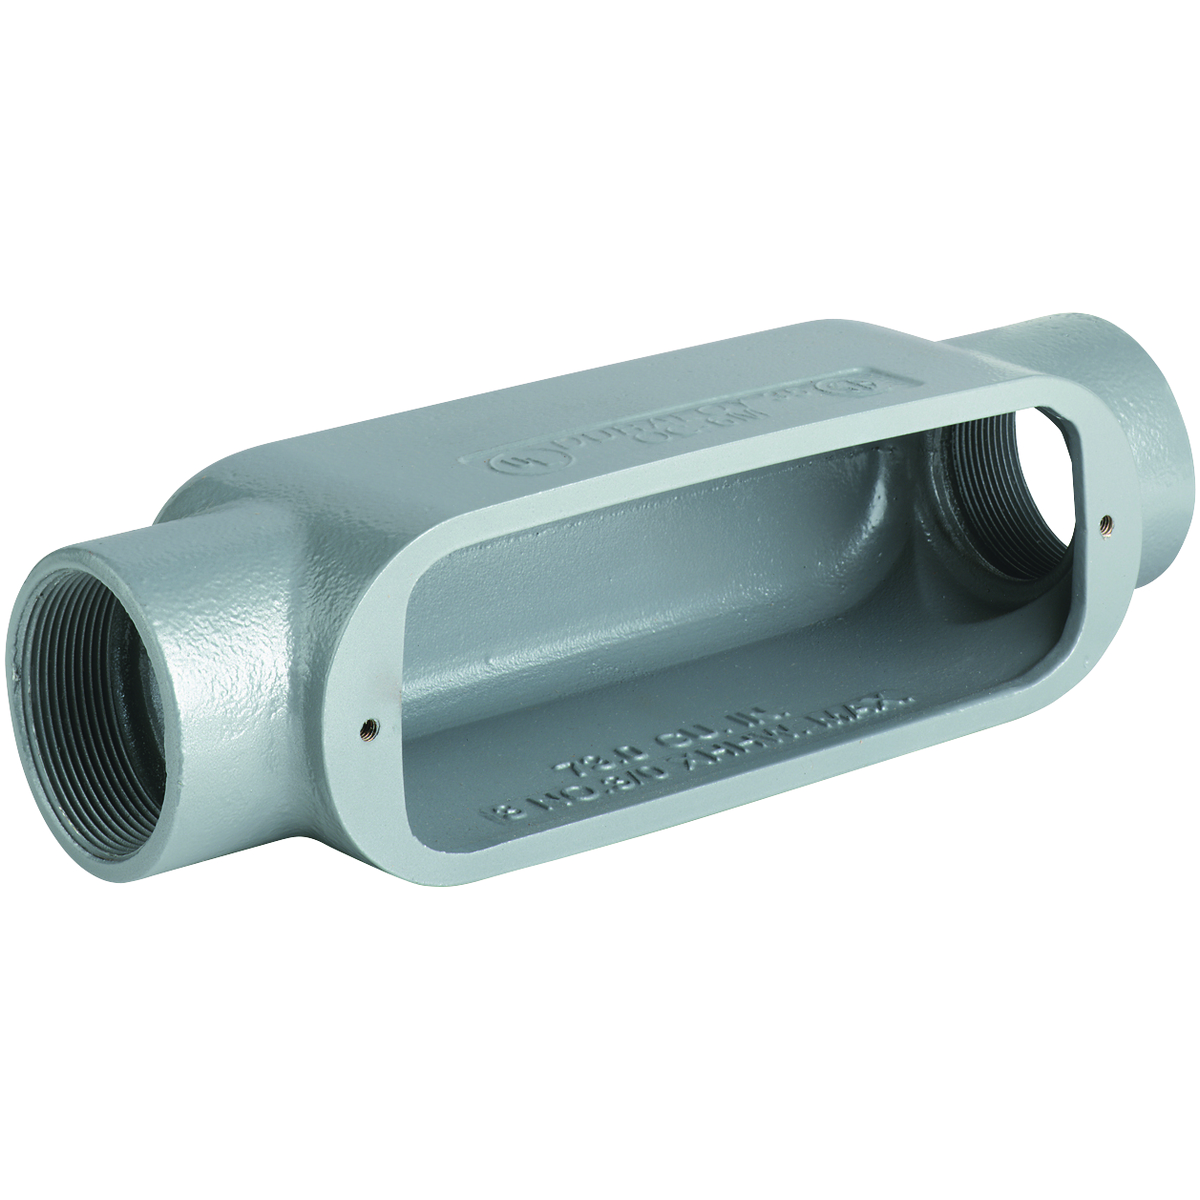 O SERIES/DURALOY 5 SERIES - ALUMINUM CONDUIT BODY - C TYPE - HUB SIZE1-1/2 INCH - VOLUME 36.0 CUBIC INCHES